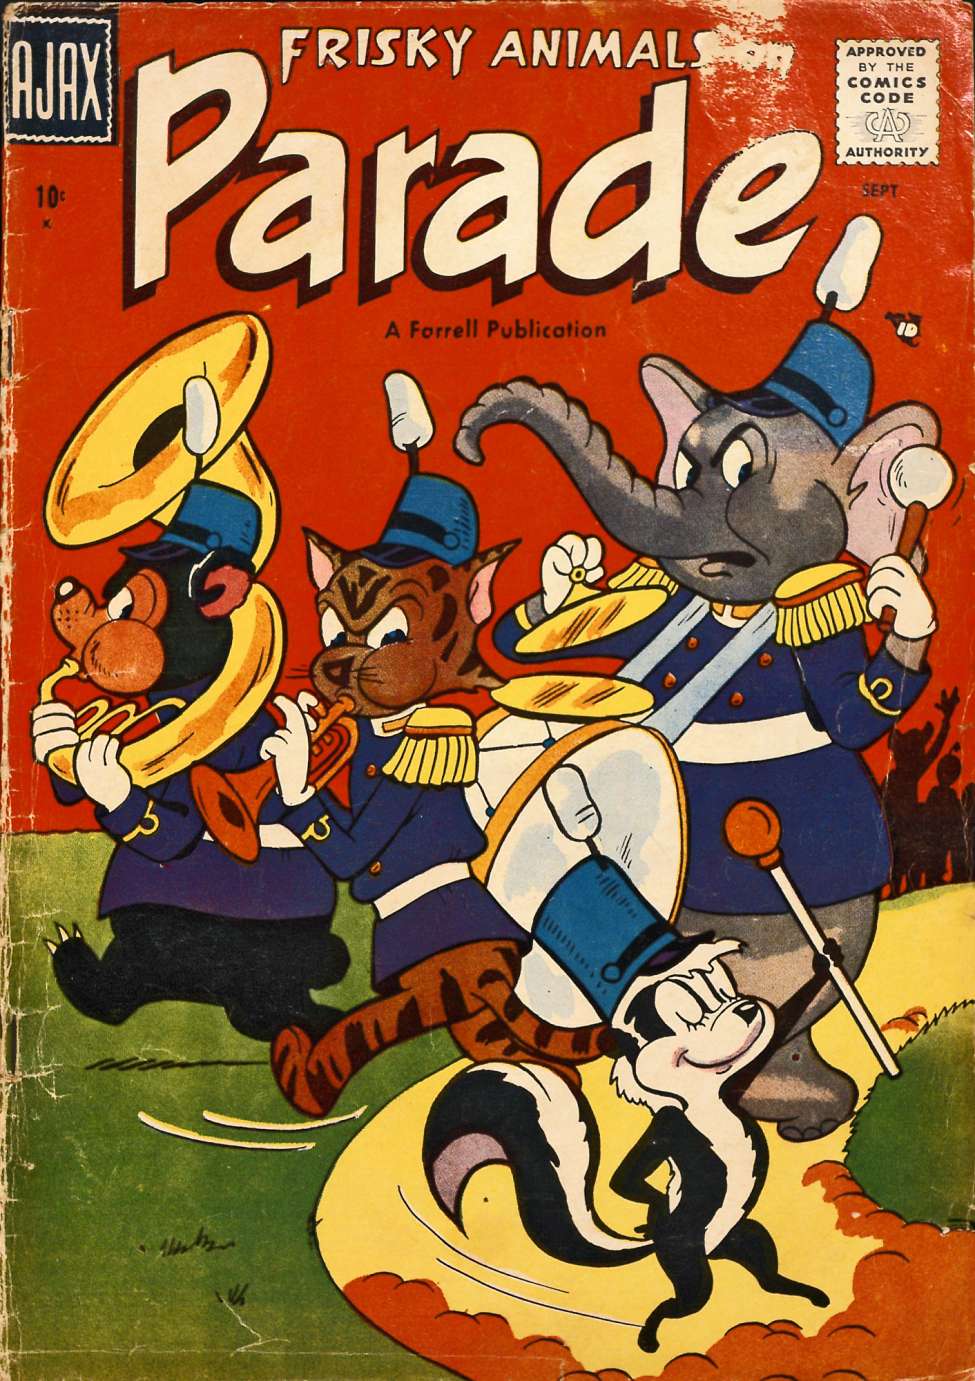 Book Cover For Frisky Animals on Parade 1 - Version 1